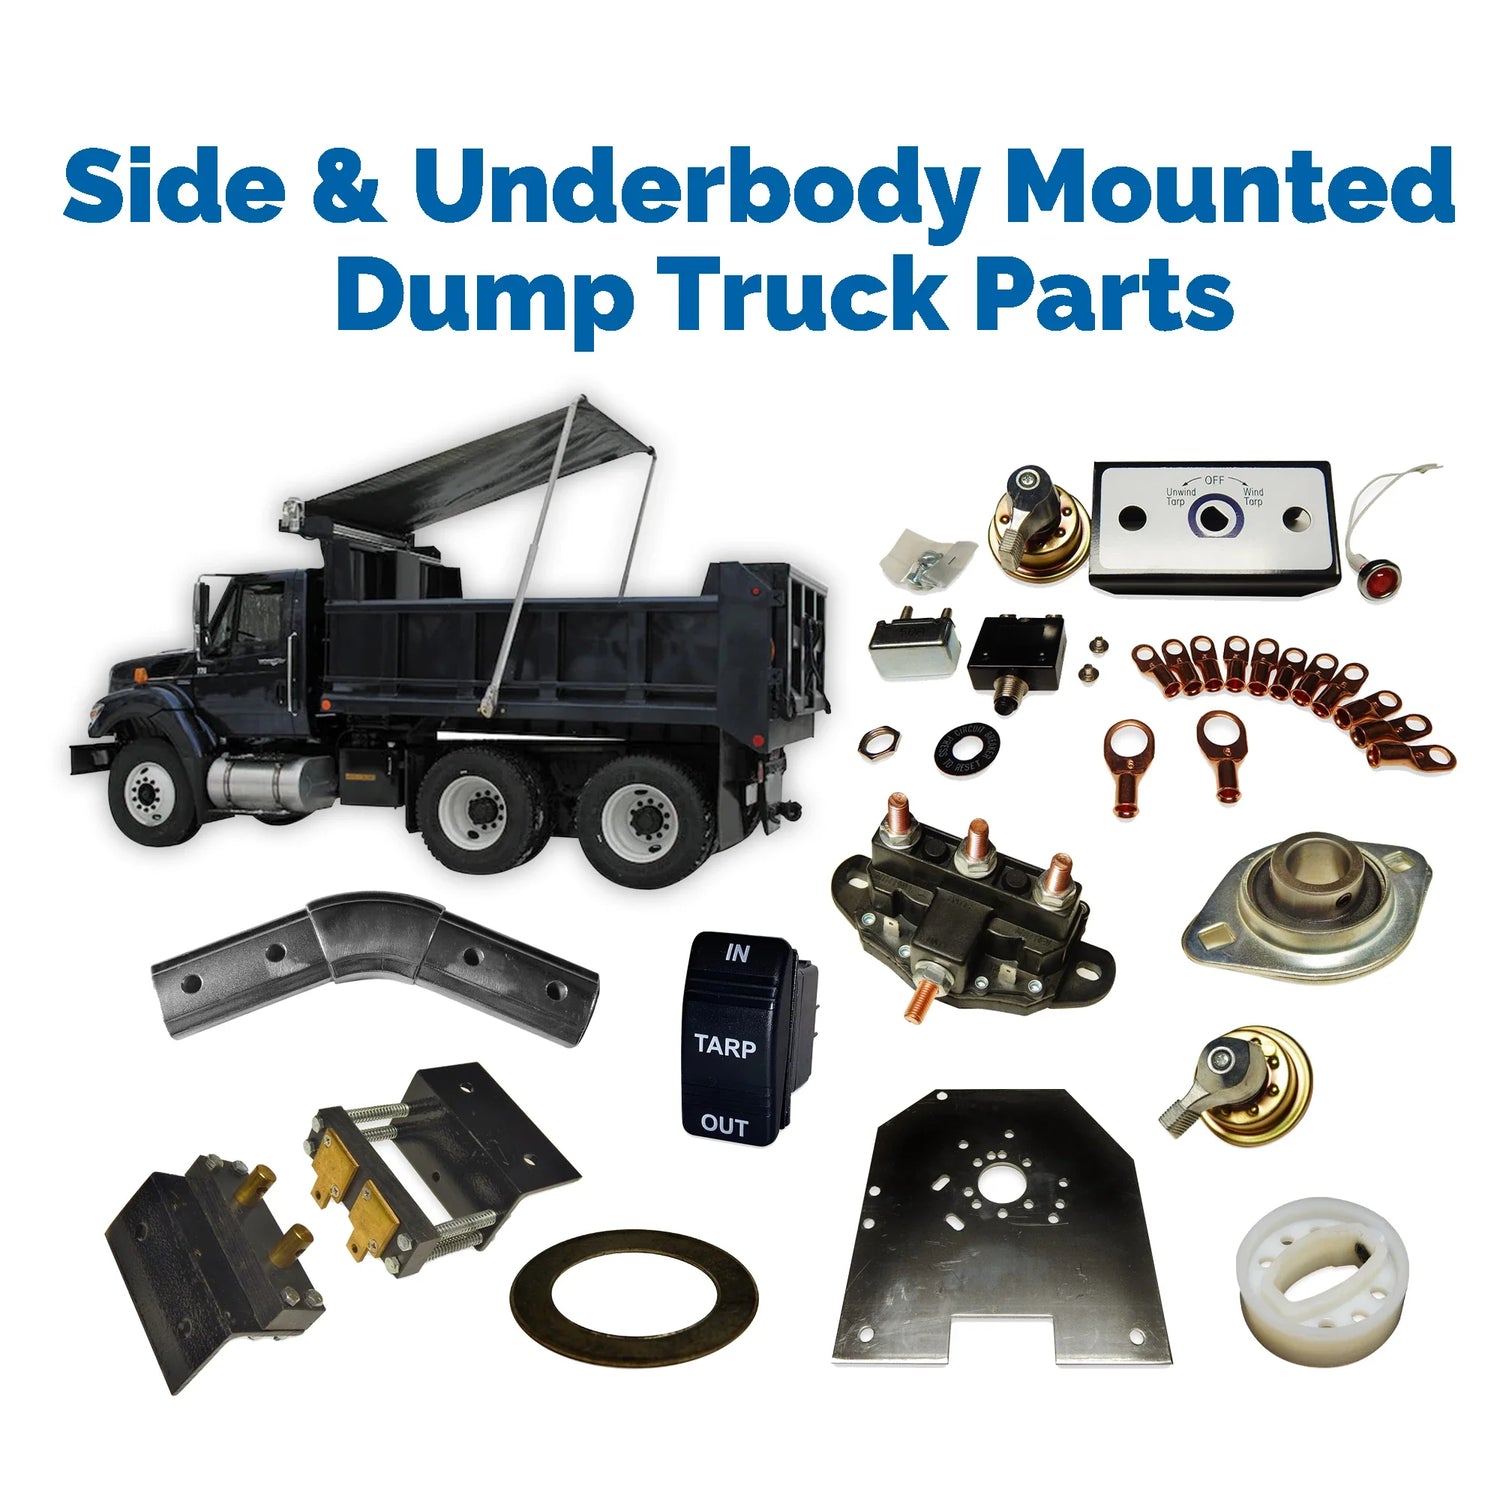 Side & Underbody Mounted Dump Truck Parts